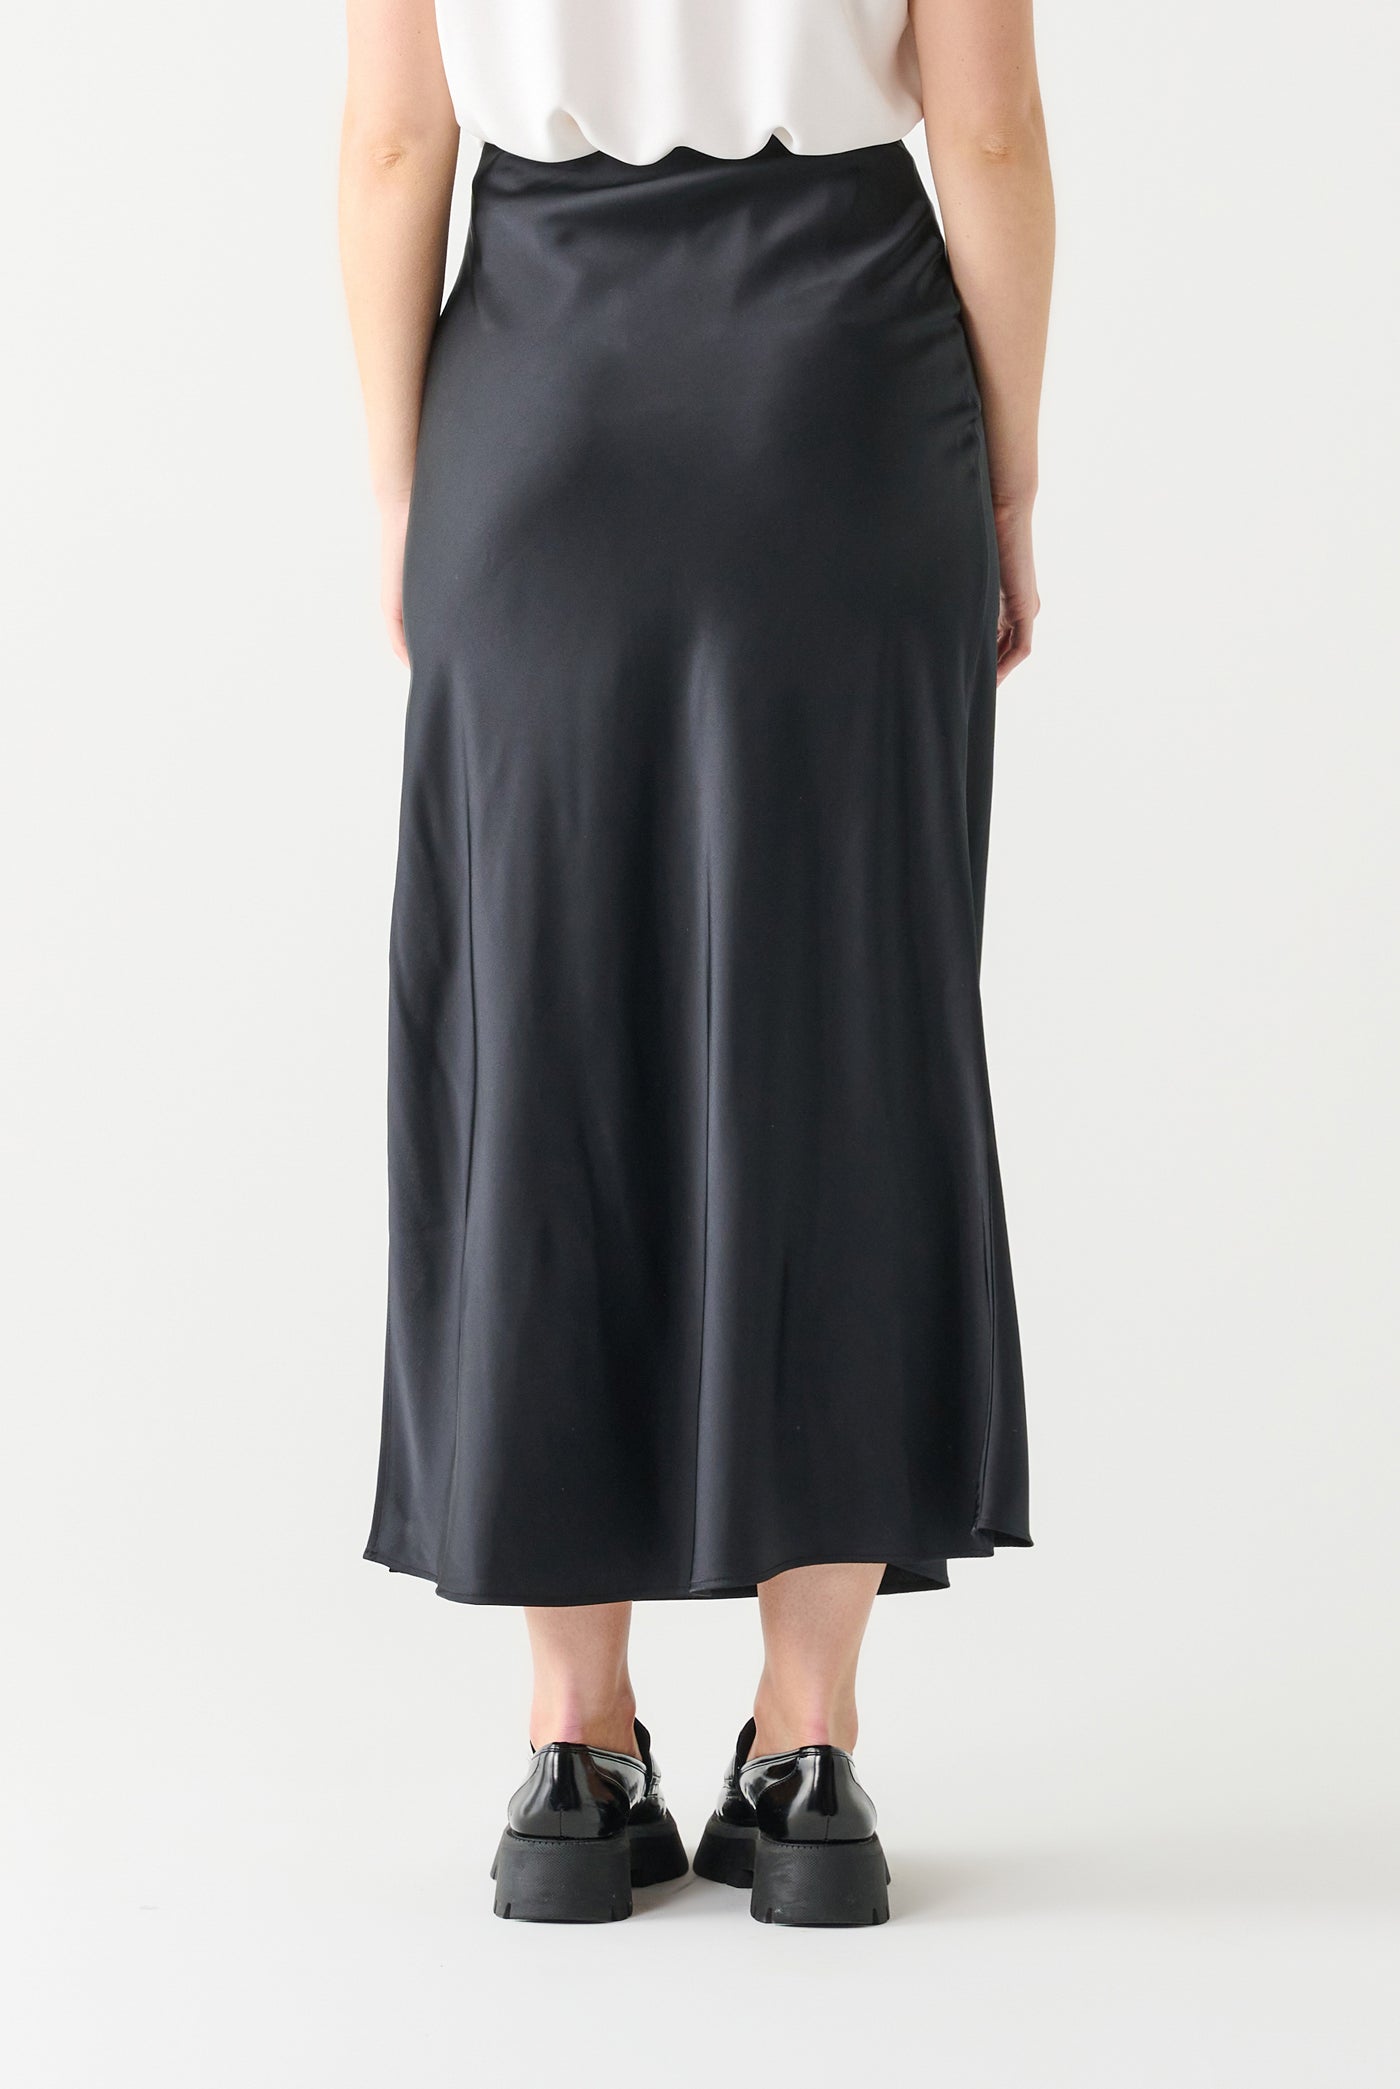 Daria Satin Maxi Skirt-Skirts-Vixen Collection, Day Spa and Women's Boutique Located in Seattle, Washington